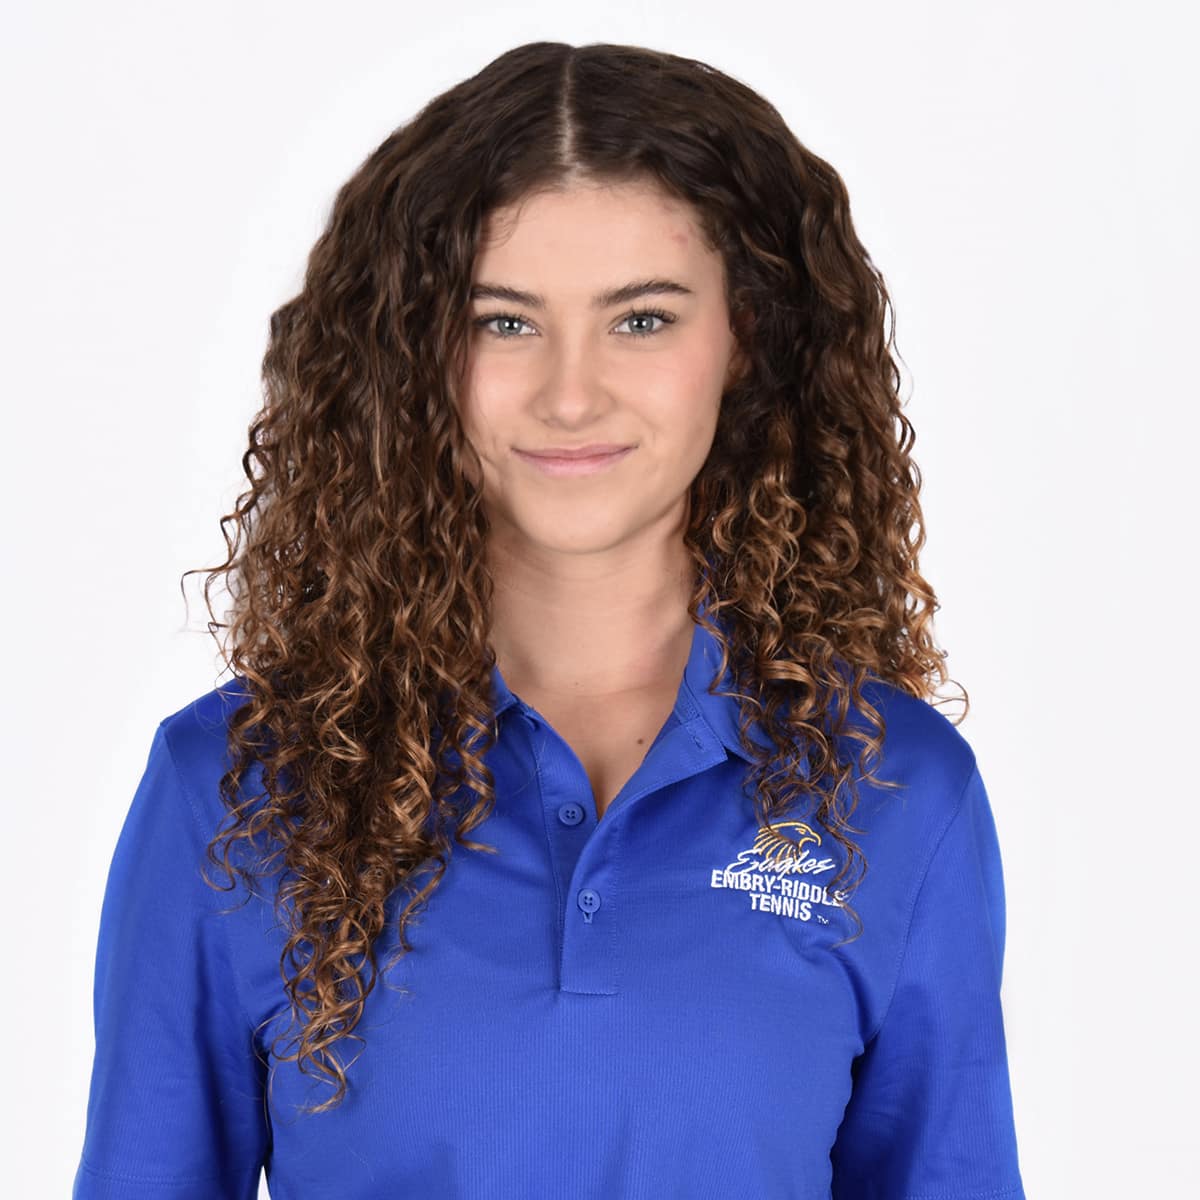 Julia, a white woman with long curly hair, wears a long sleeved blue polo shirt.